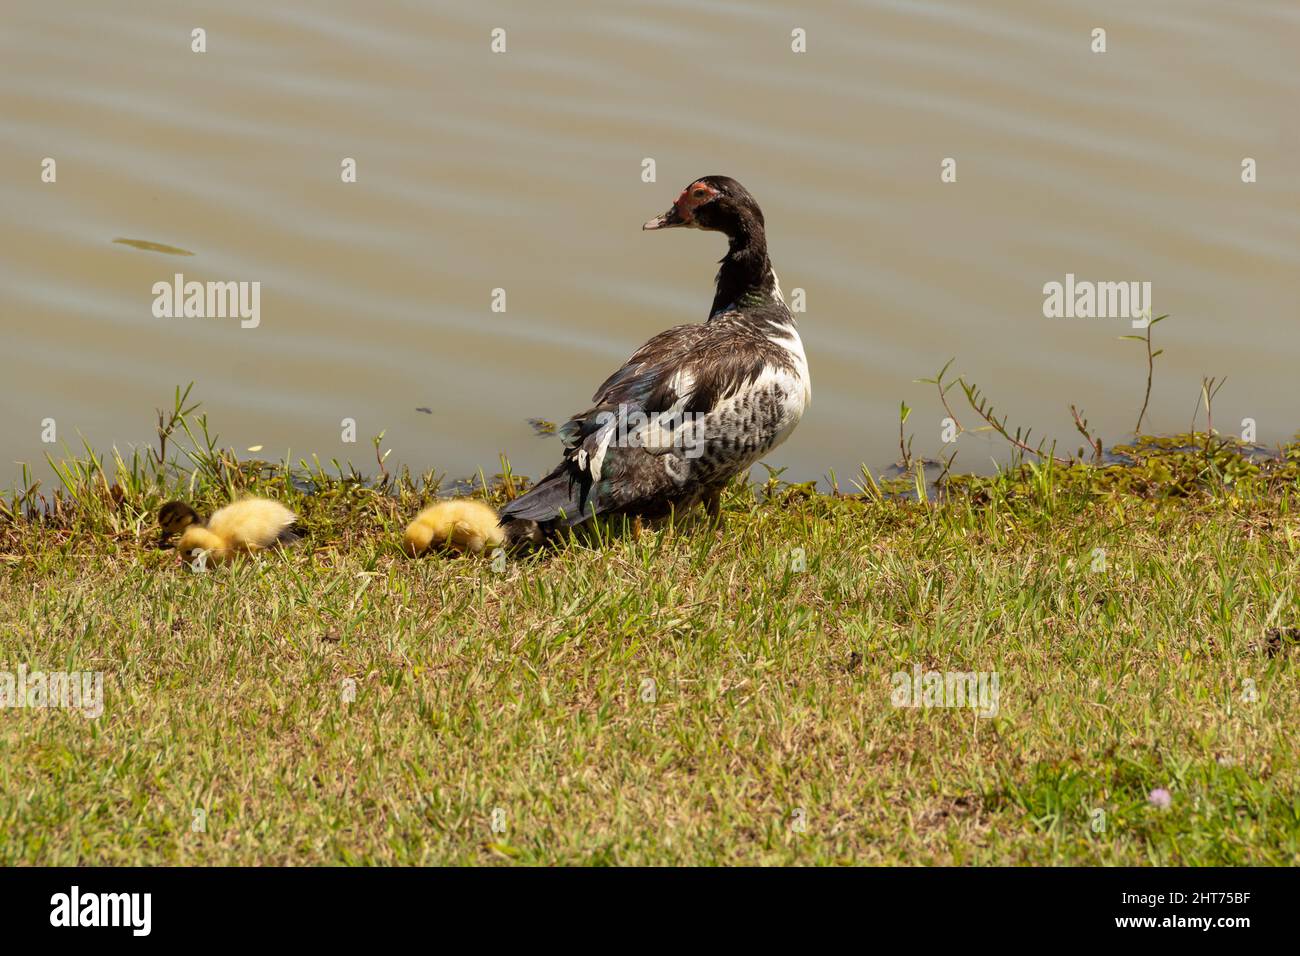 Goiânia, Goias, Brazil – February 26, 2022: A duck with her three cute babies by a lake. Stock Photo